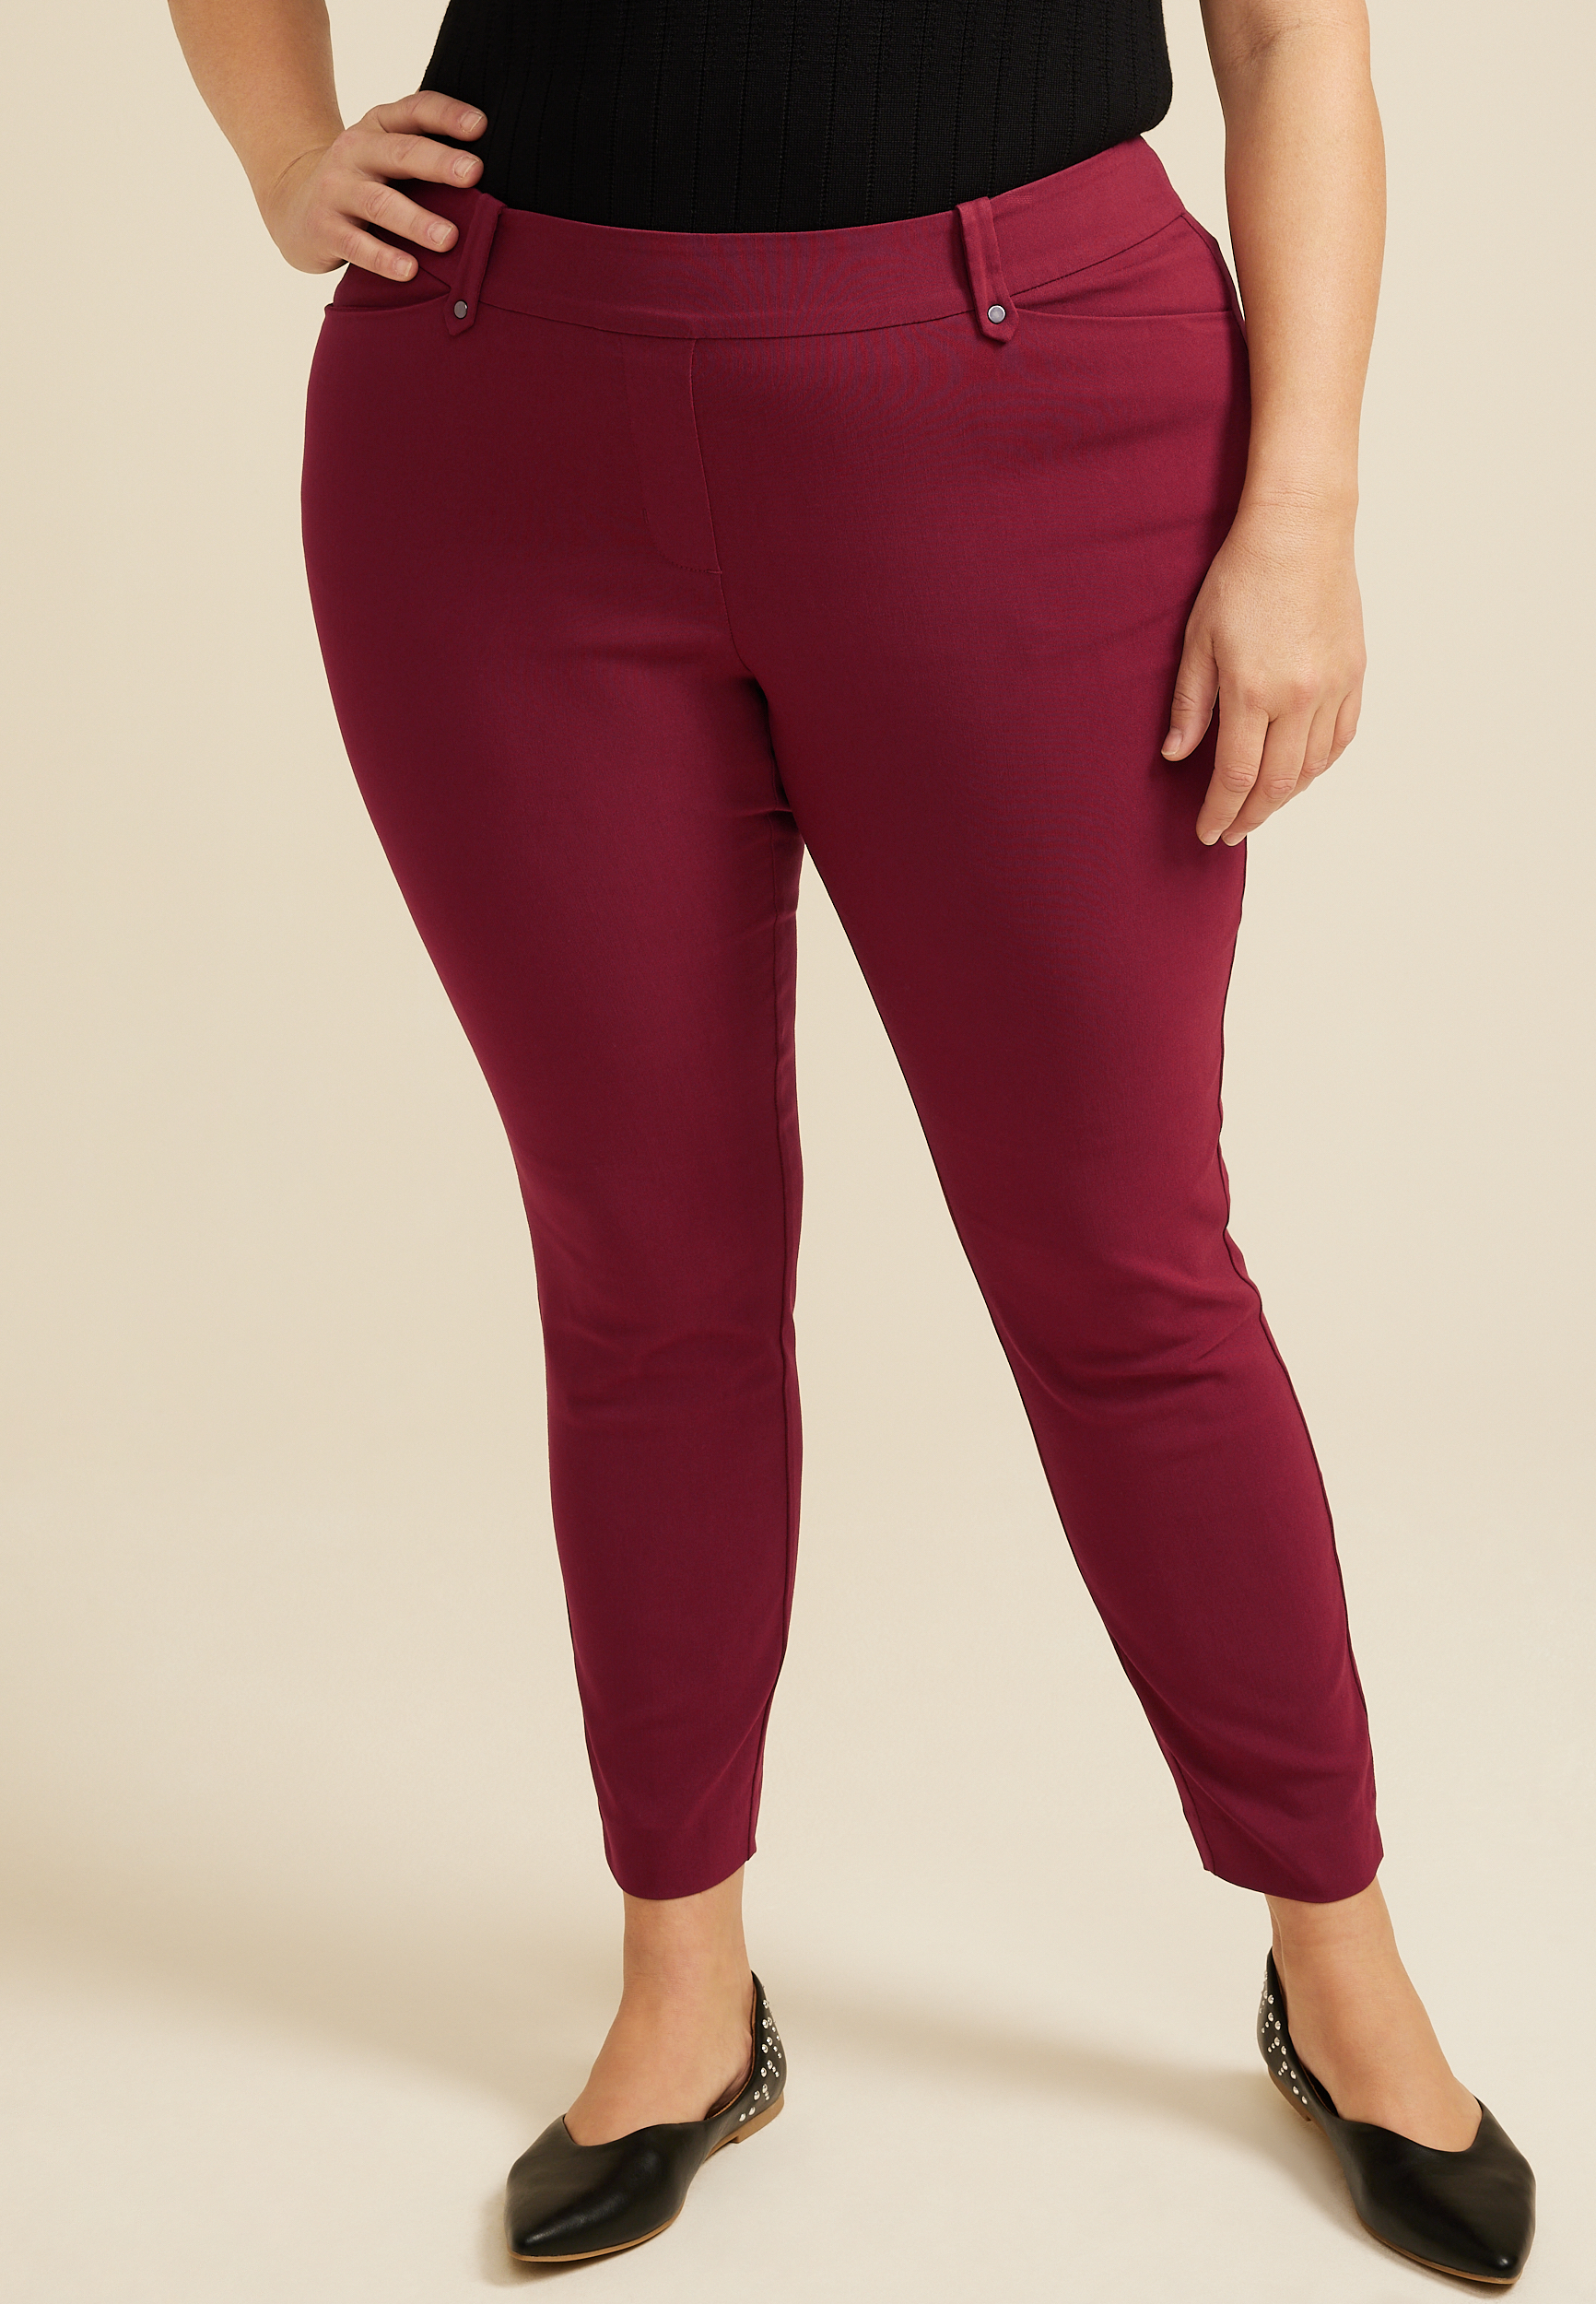 Plus Size Pull On Bengaline Skinny Ankle Dress Pant | maurices